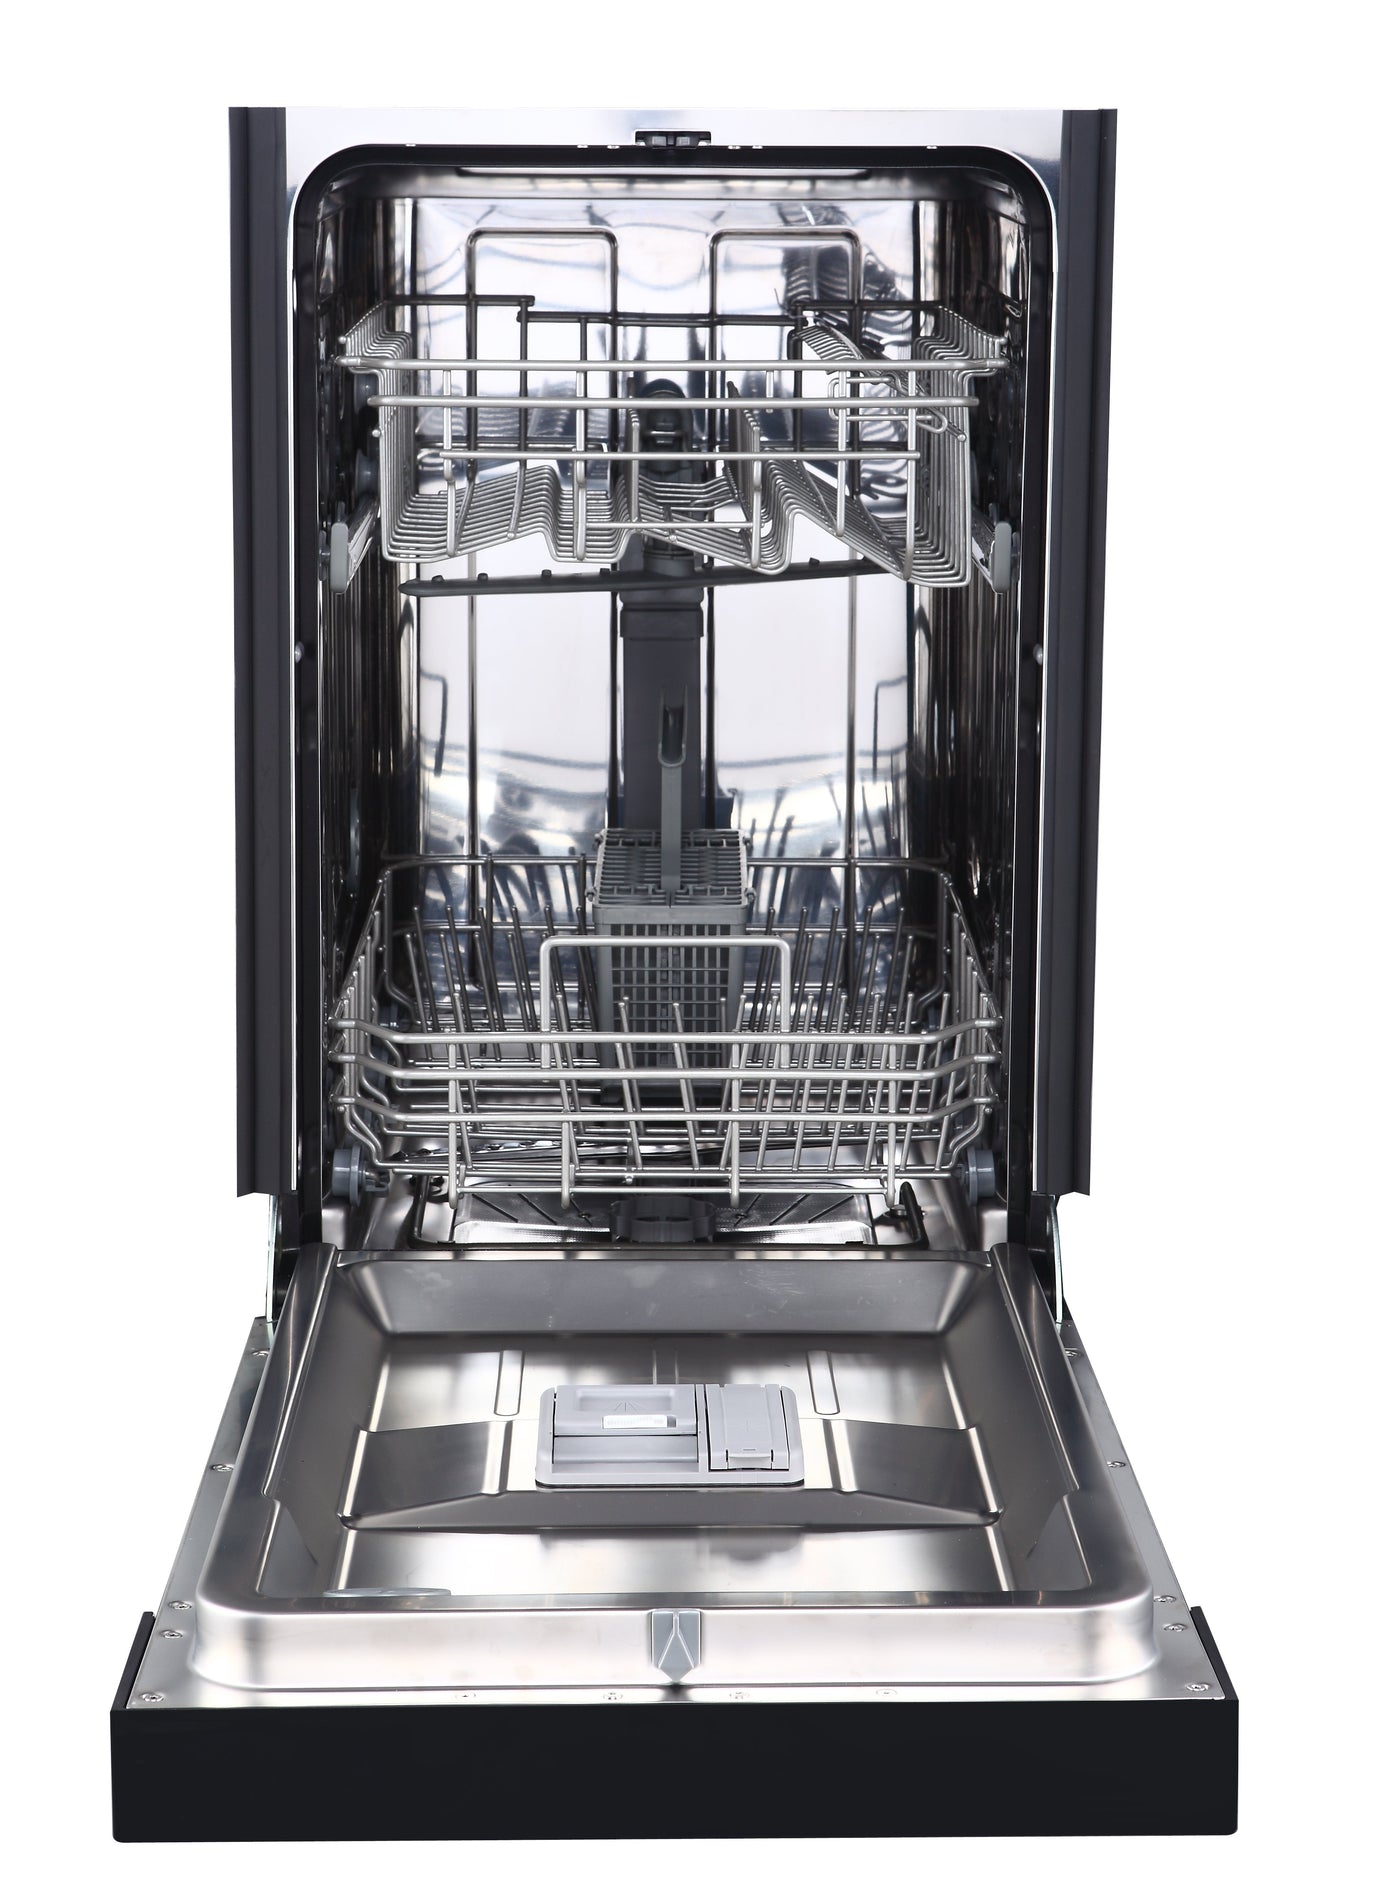 GE Stainless Steel 18" Built-In Dishwasher - GBF180SSMSS